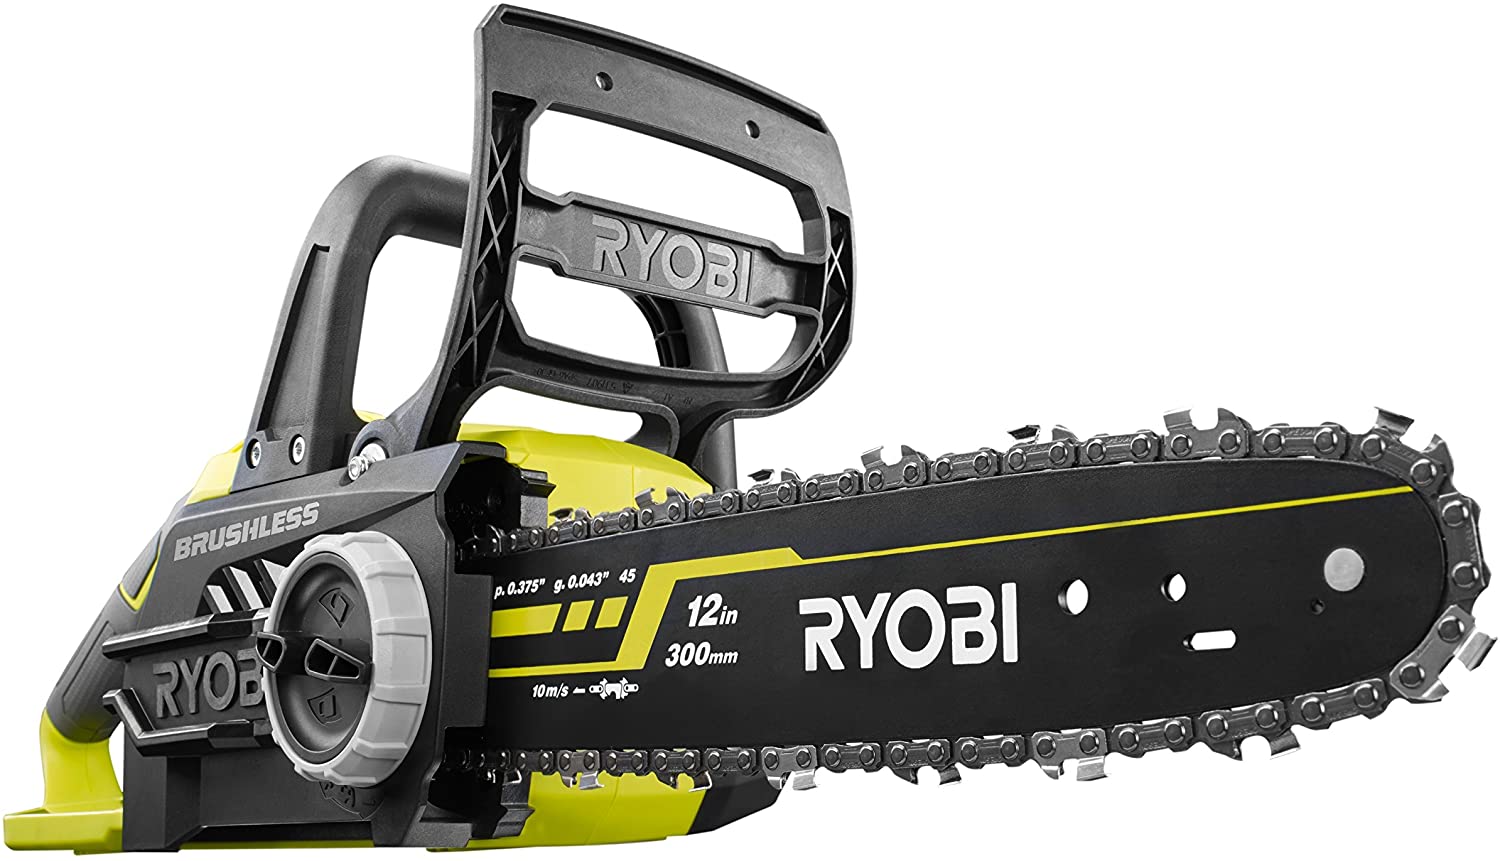 Close up view of the Ryobi OCS1830 One+ Cordless Brushless Chainsaw.